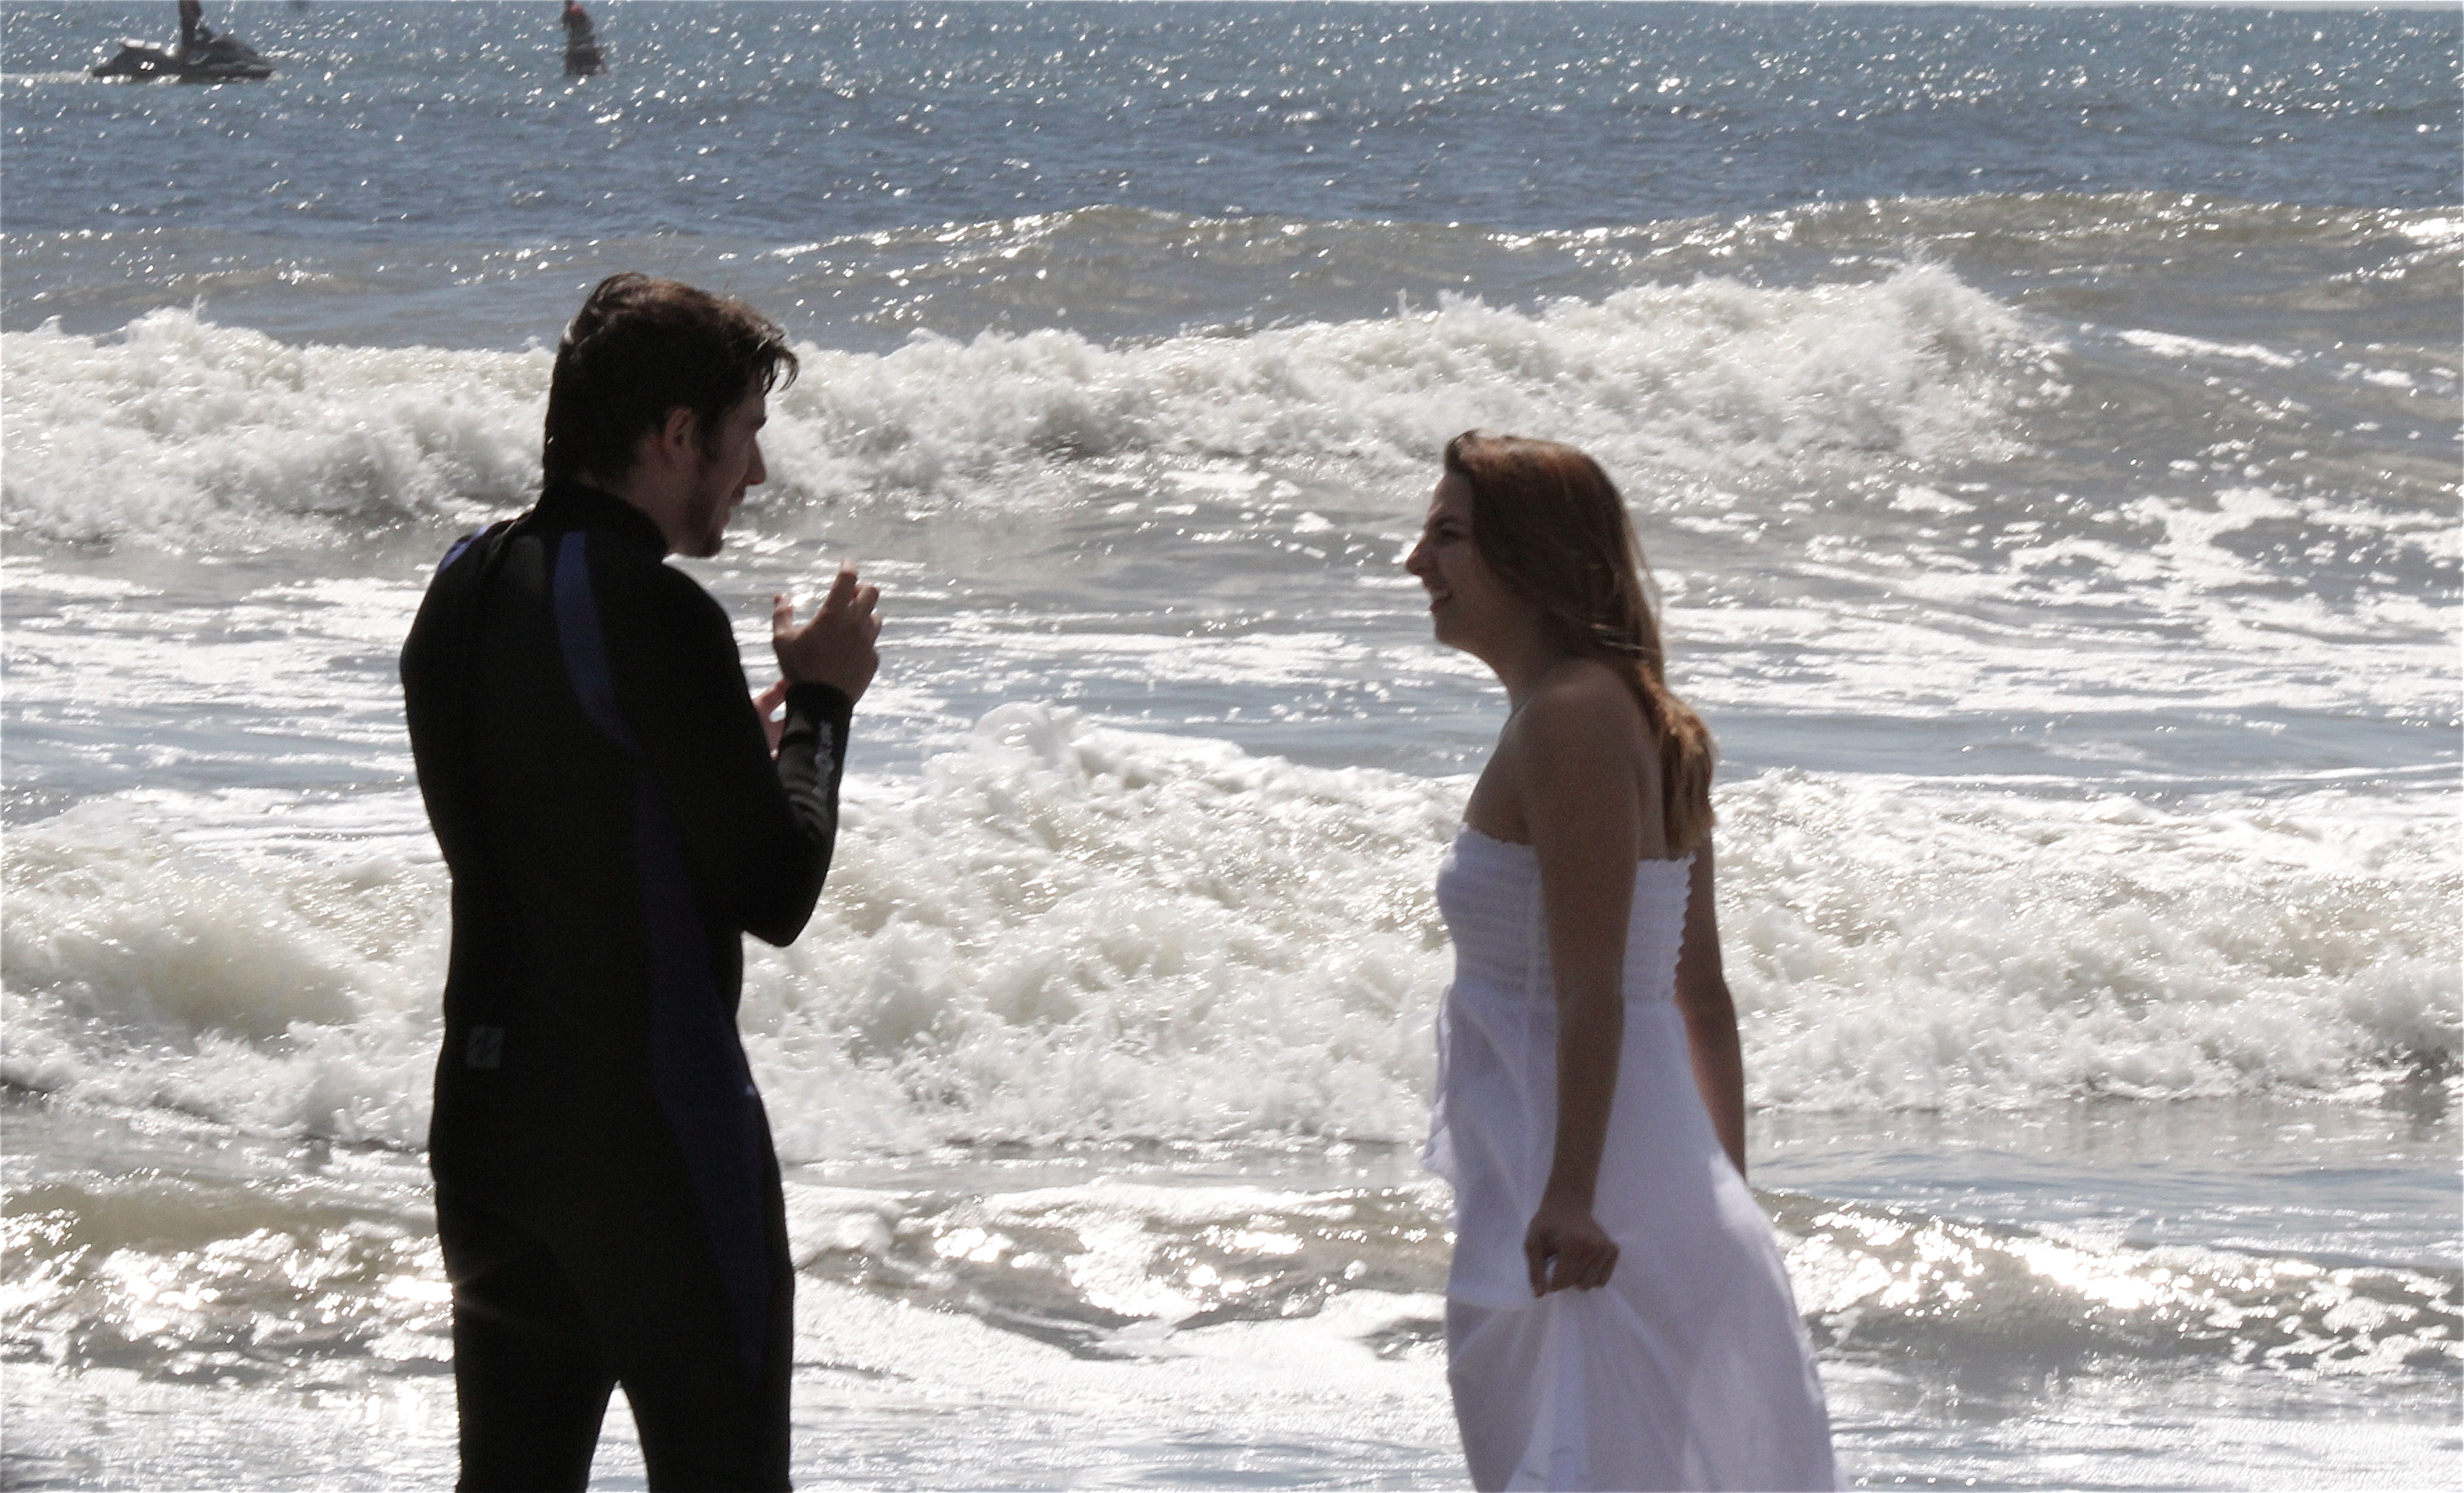 Director Kyle Thompson (left) and Actress Cuba Hatheway (right) on set of SWIM